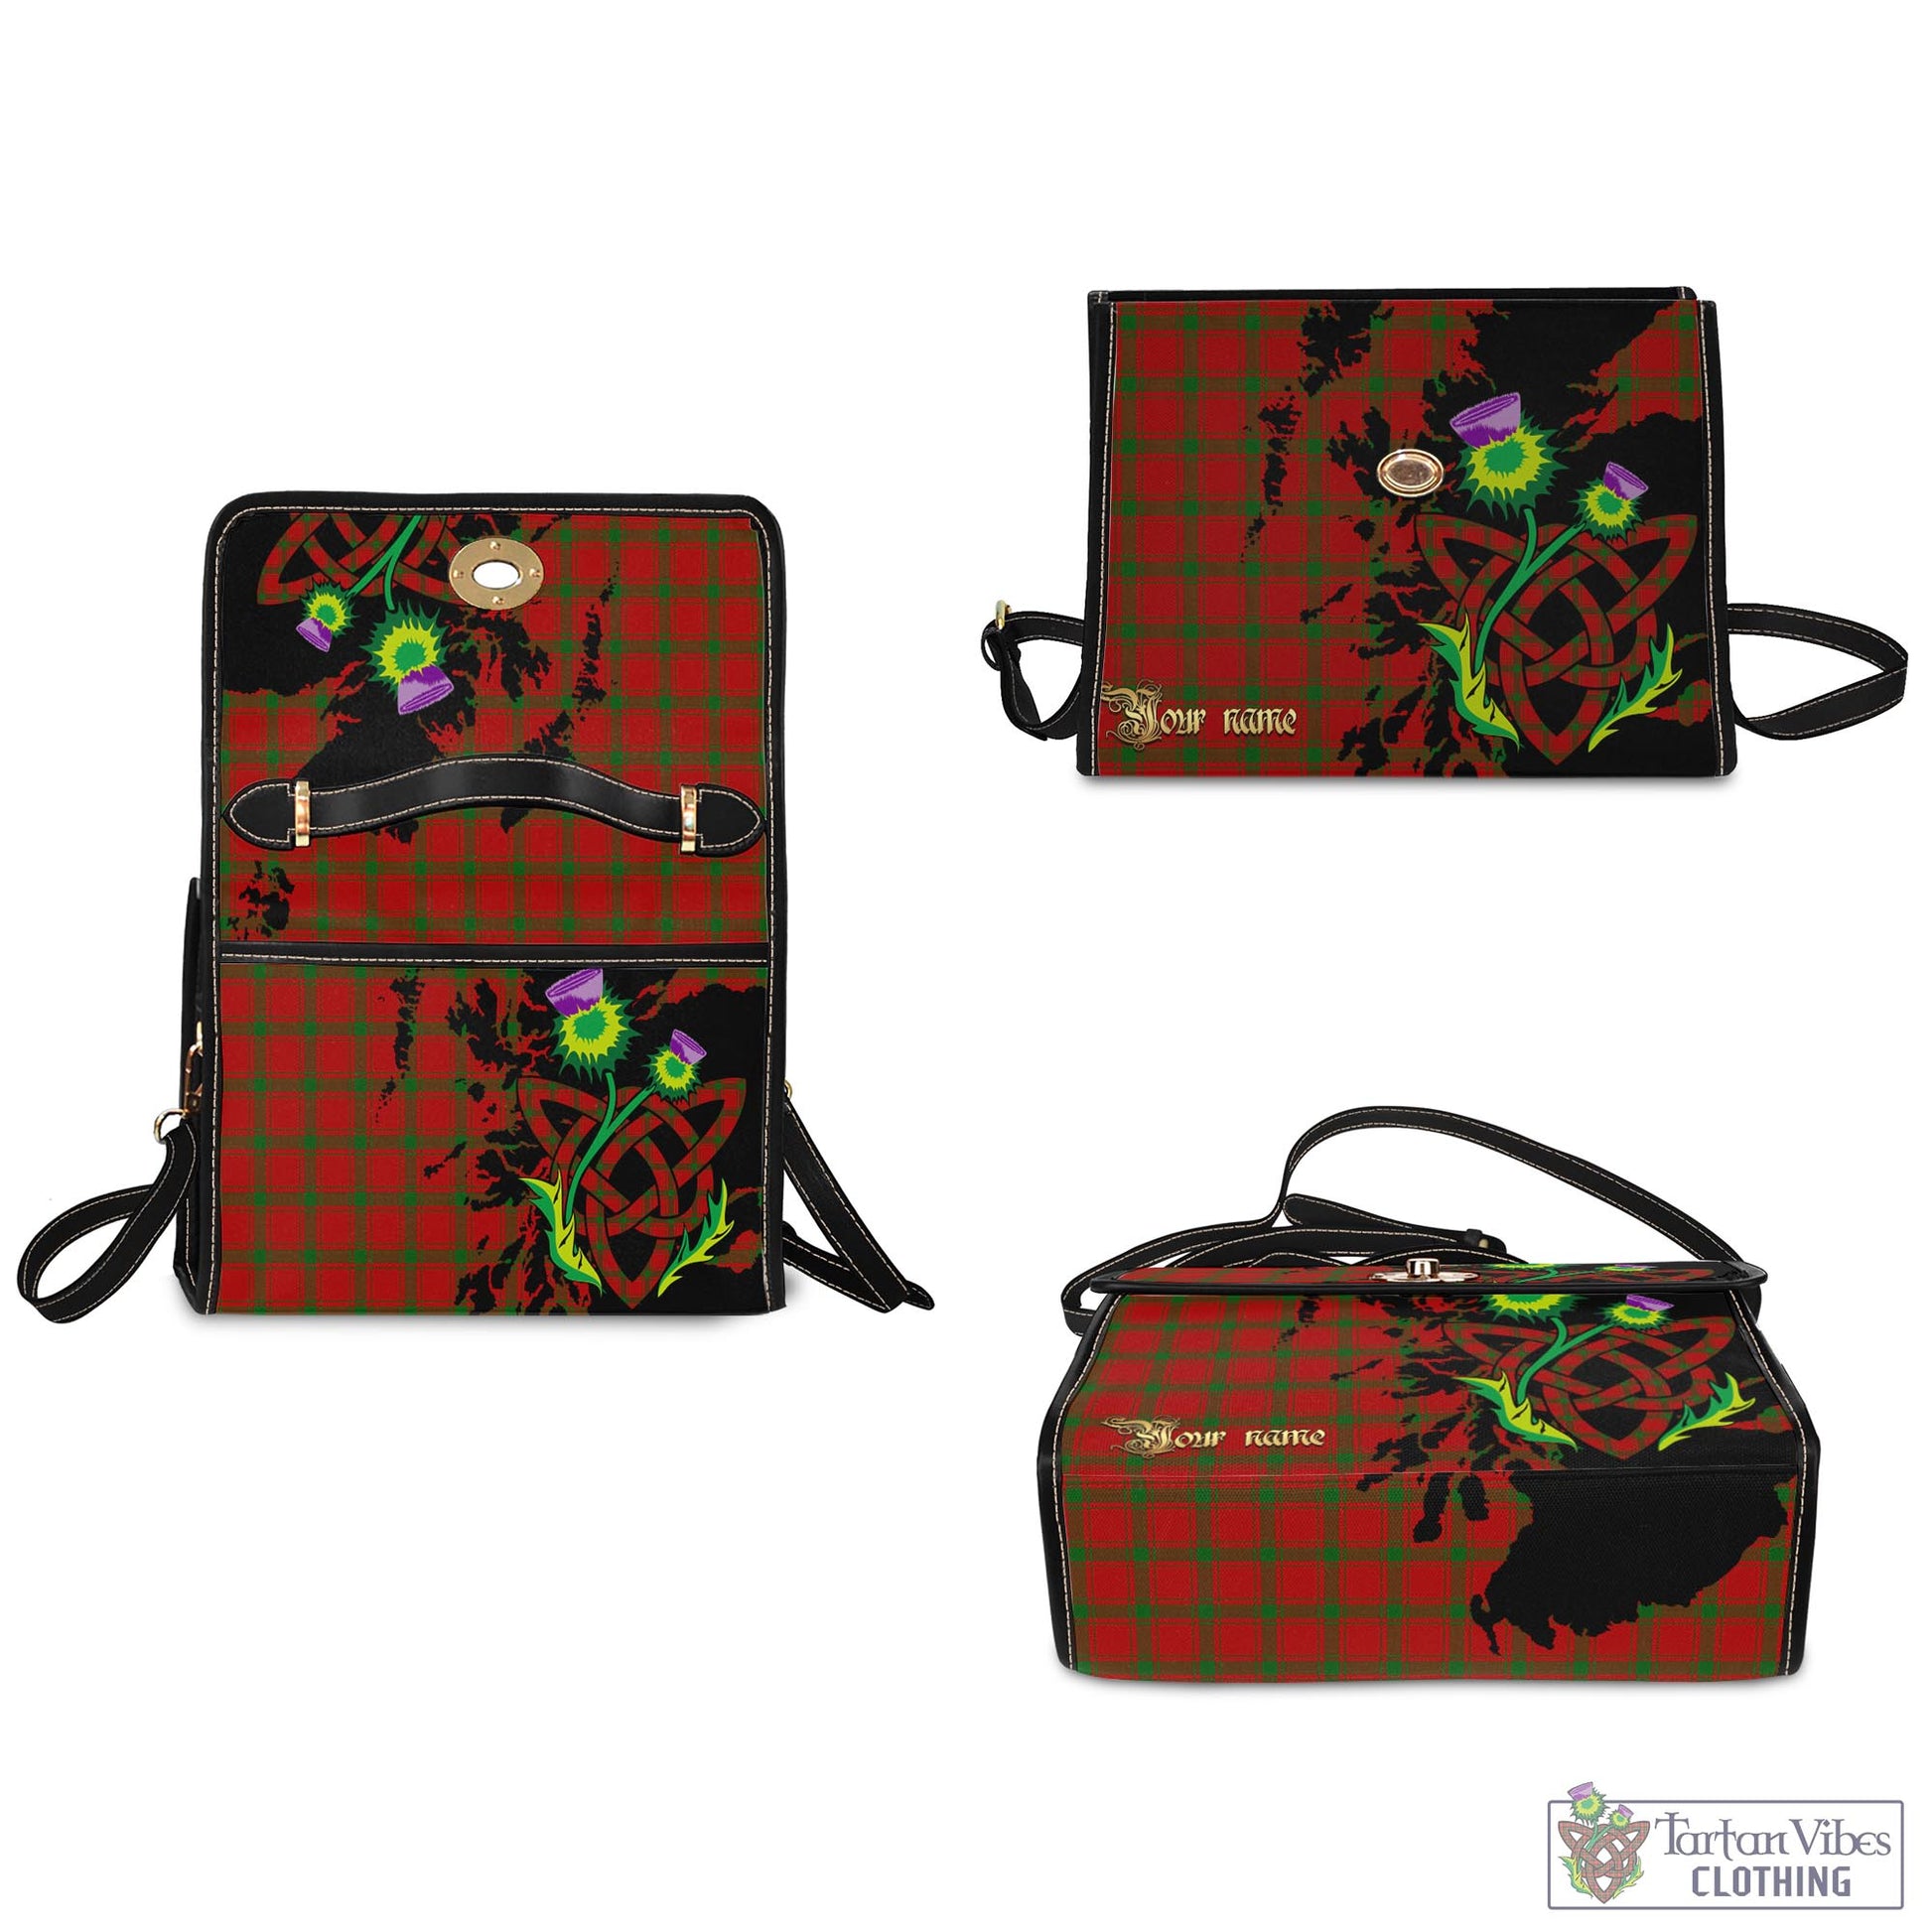 Tartan Vibes Clothing MacDonald of Sleat Tartan Waterproof Canvas Bag with Scotland Map and Thistle Celtic Accents